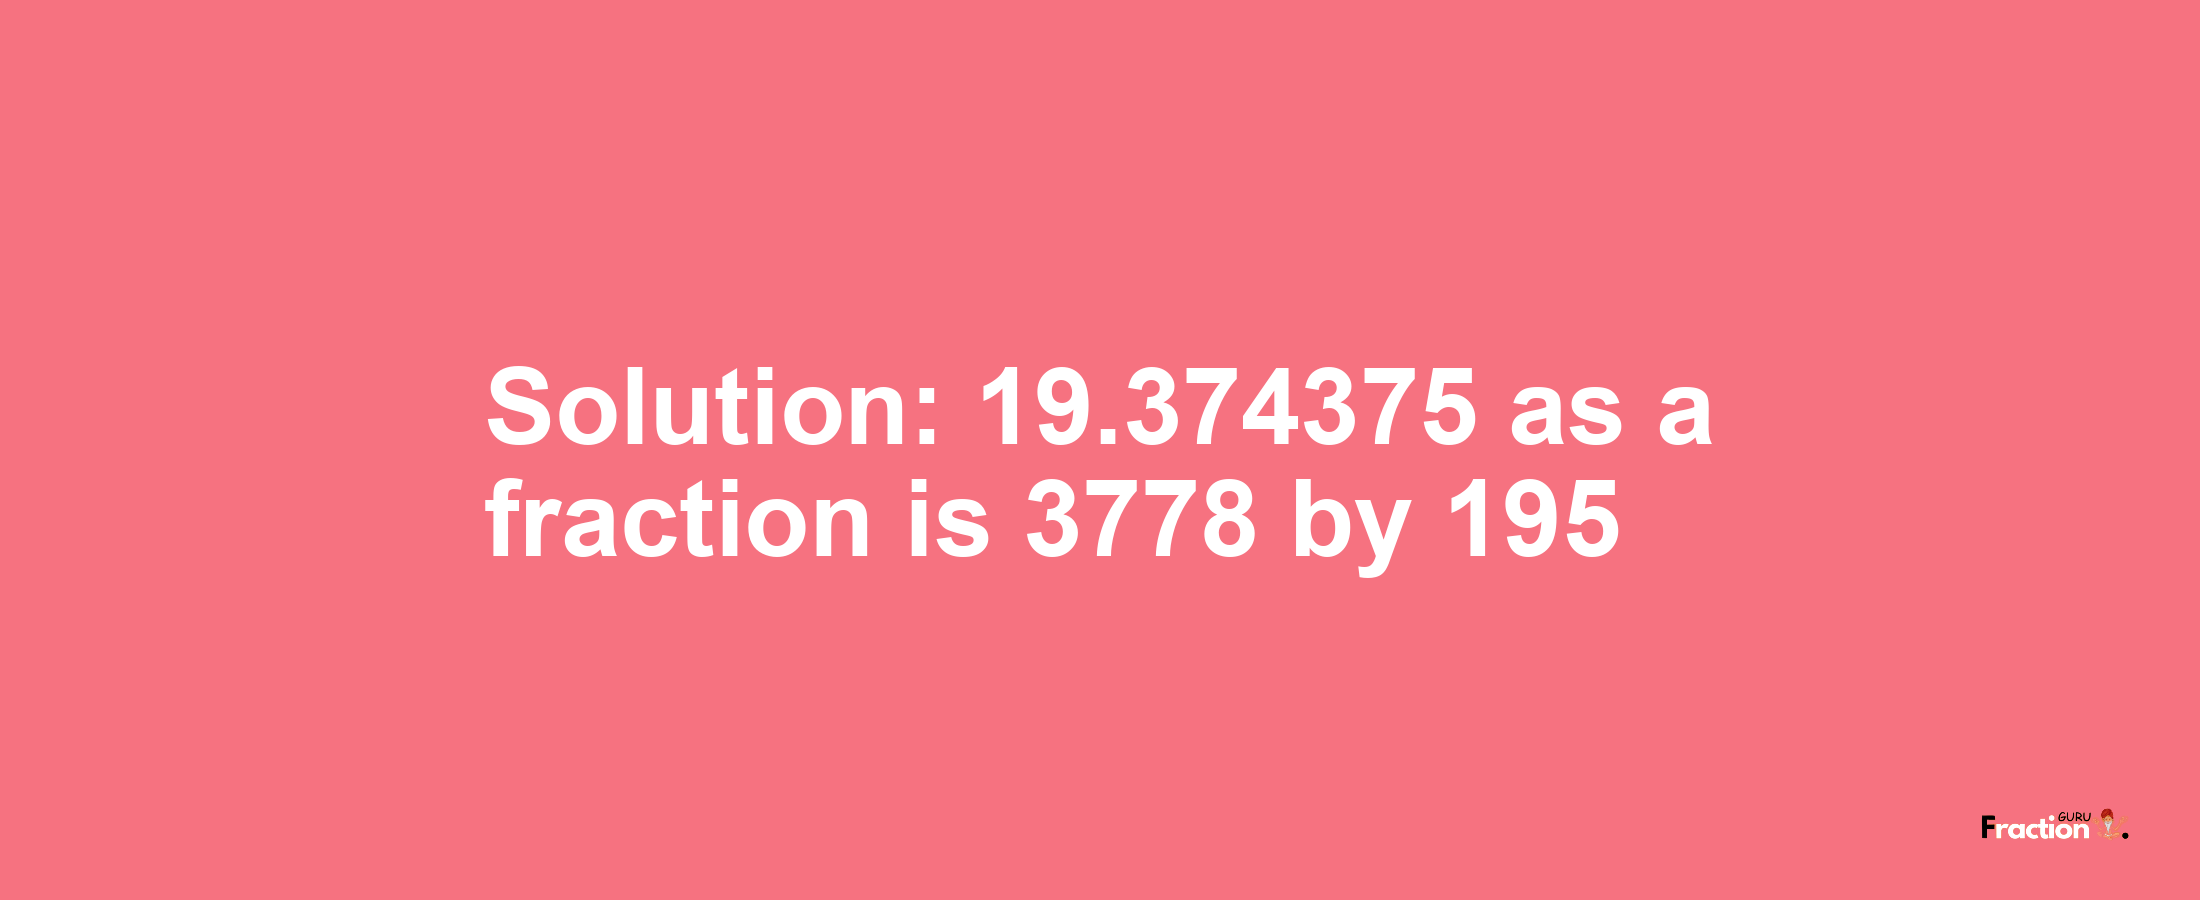 Solution:19.374375 as a fraction is 3778/195